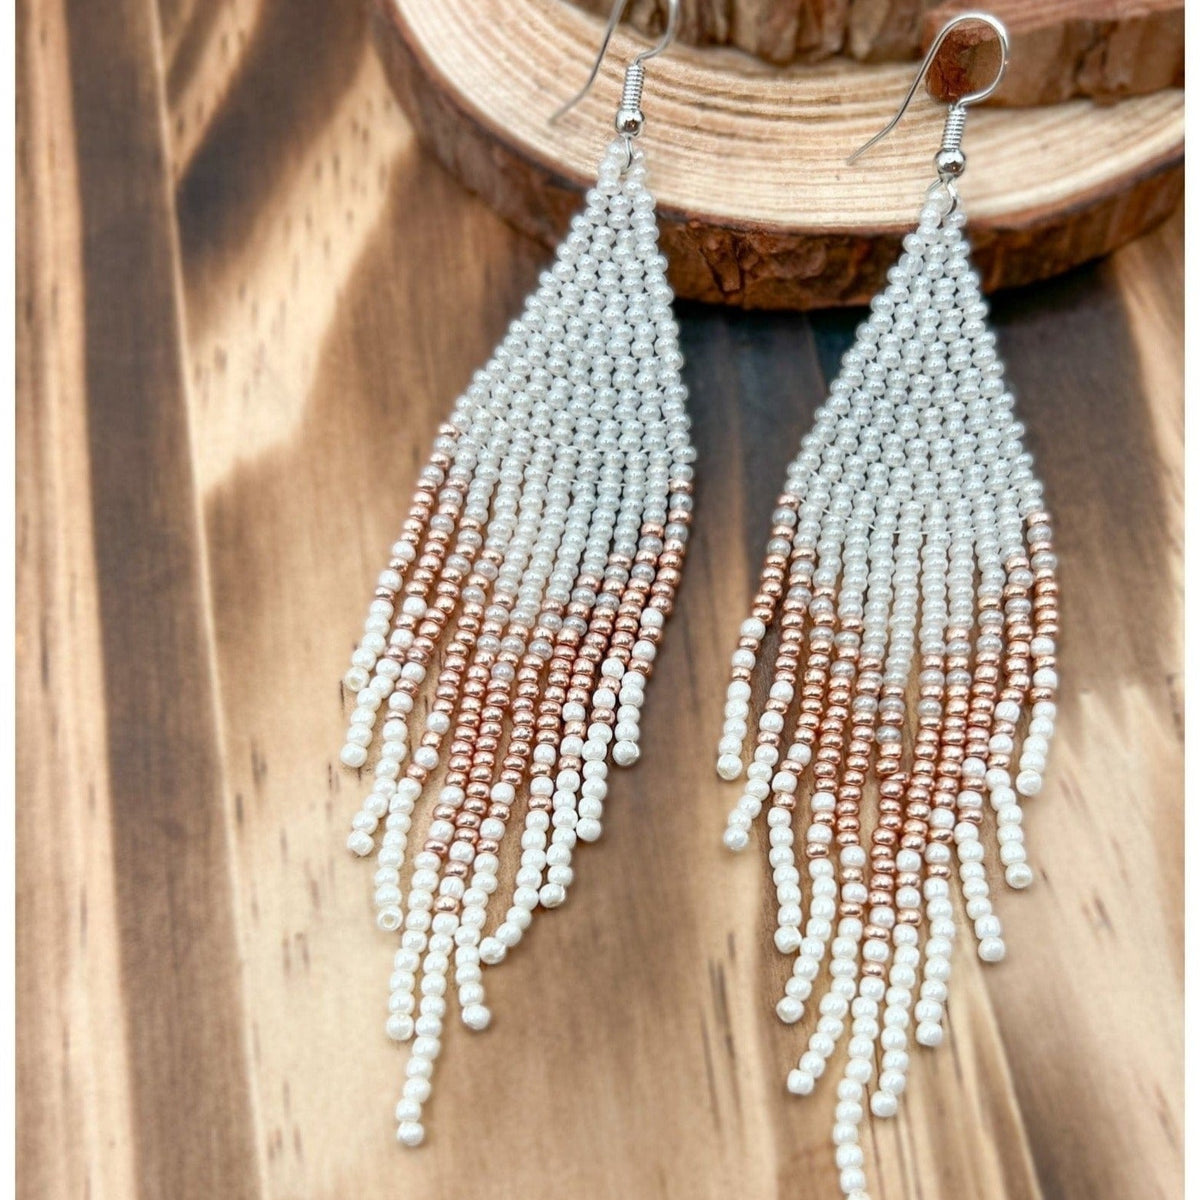 Ceremony Fringe Beaded Earrings Beaded Earrings TheFringeCultureCollective